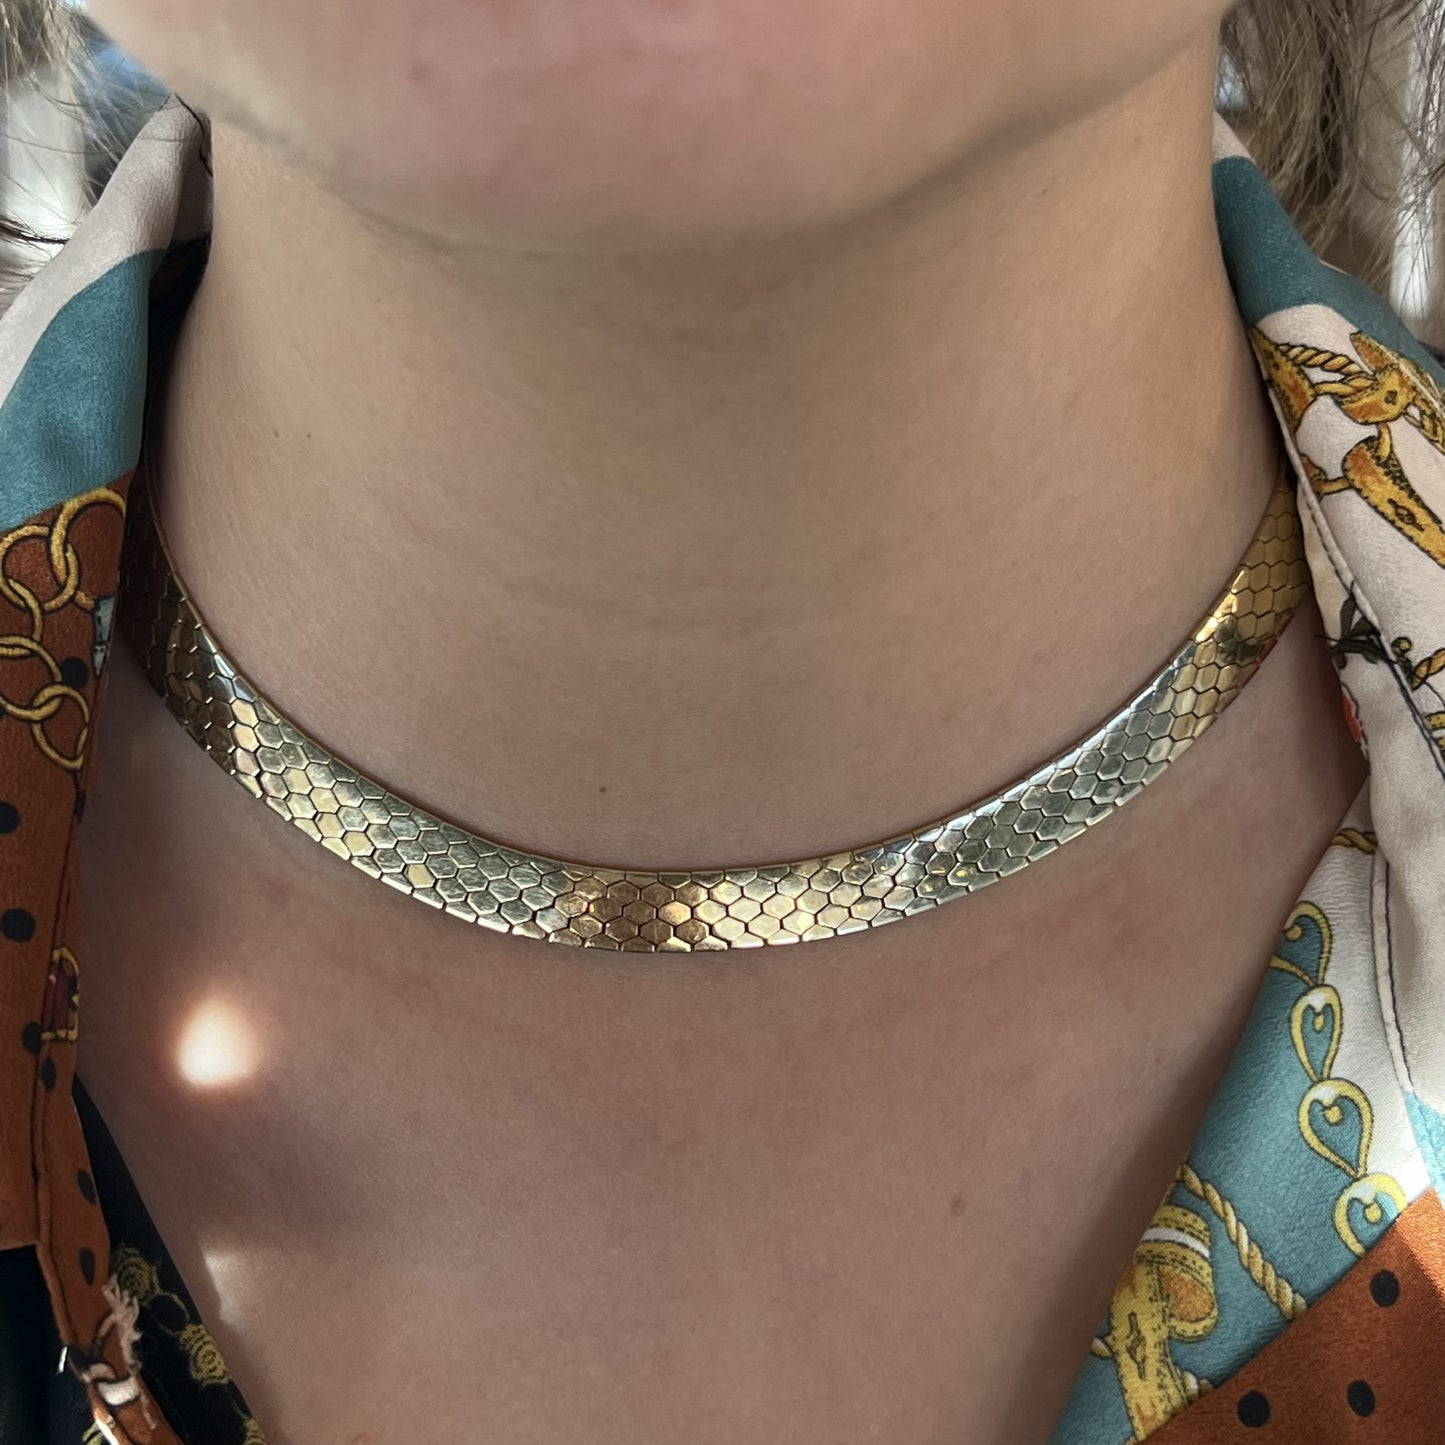 Honeycomb Patterned Collar Necklace in 14k Yellow Gold